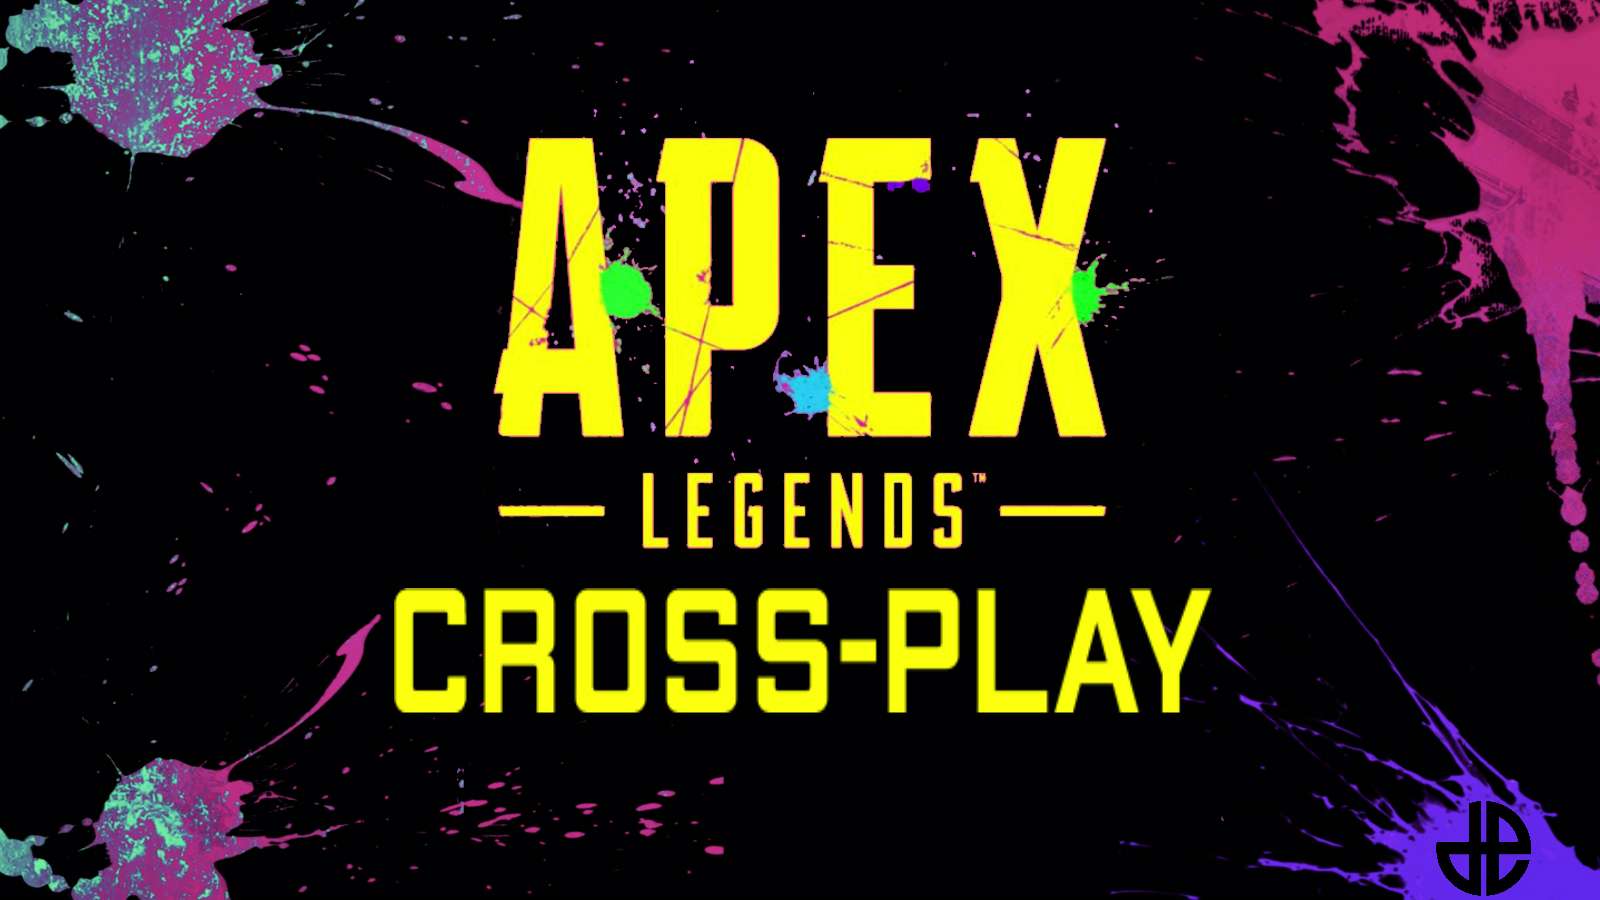 Apex Legends logo and crossplay